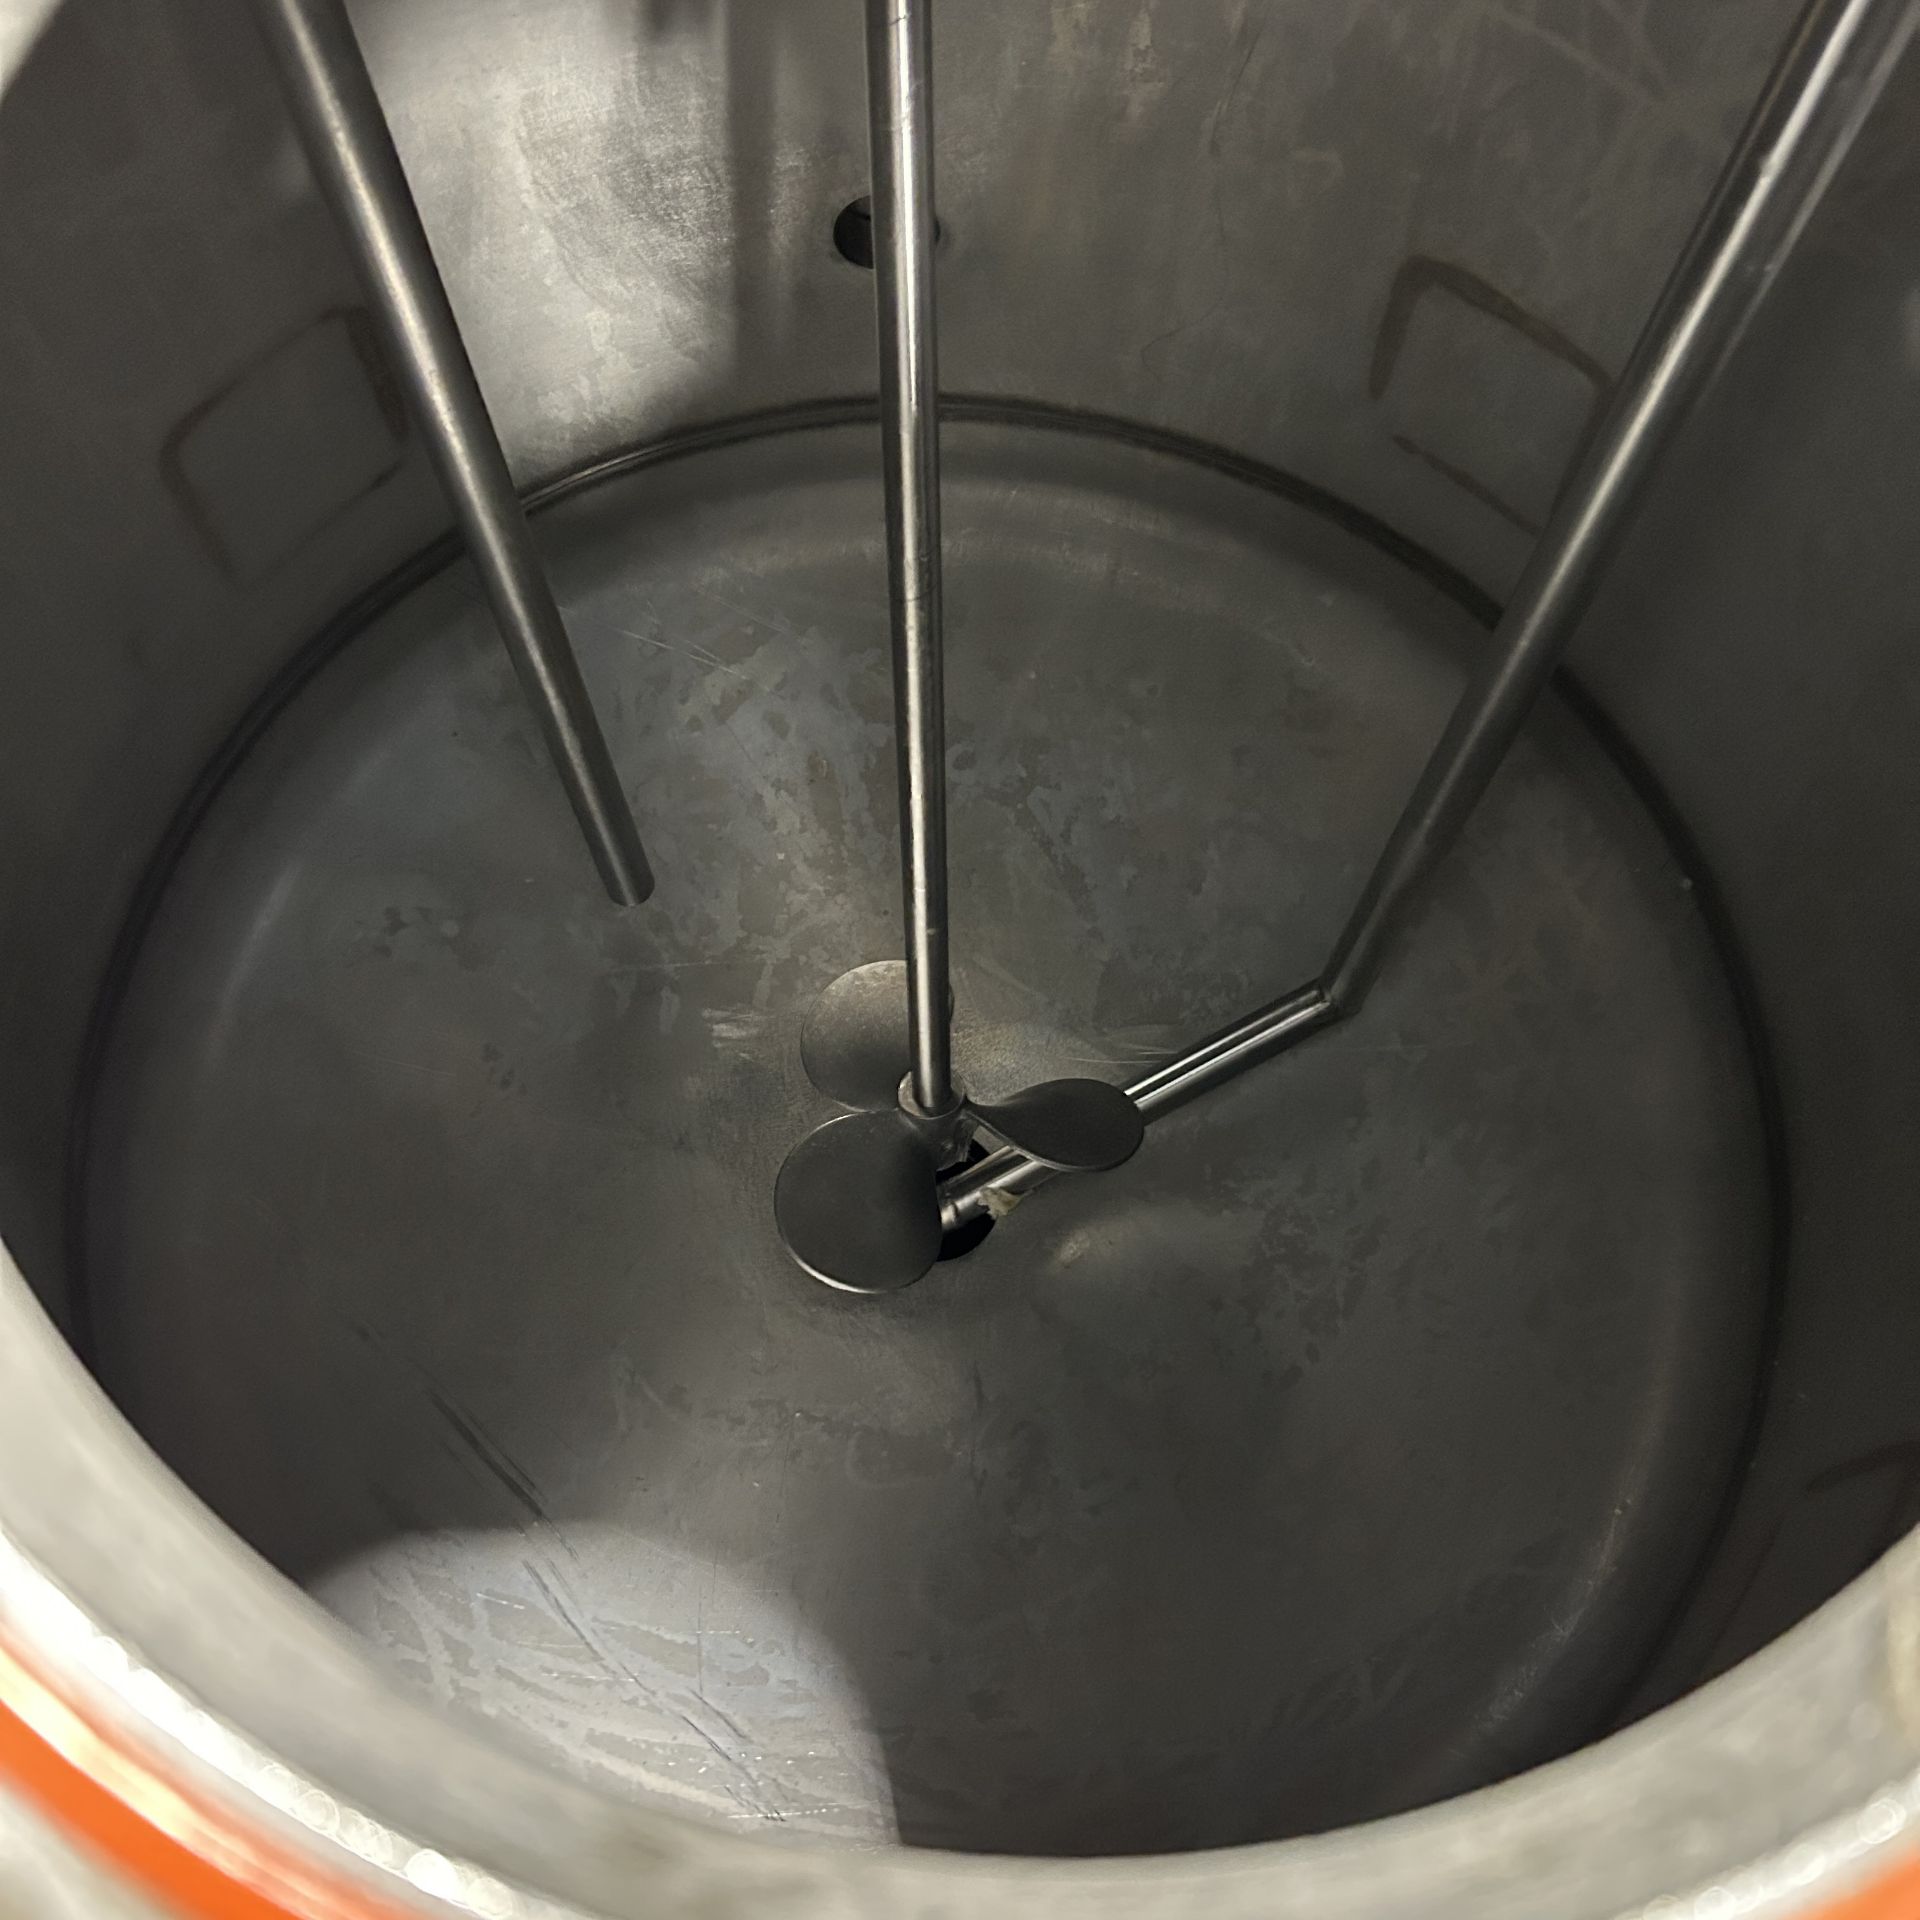 2019 Amherst Stainless Steel Agitation Pressure Pot - Image 7 of 8